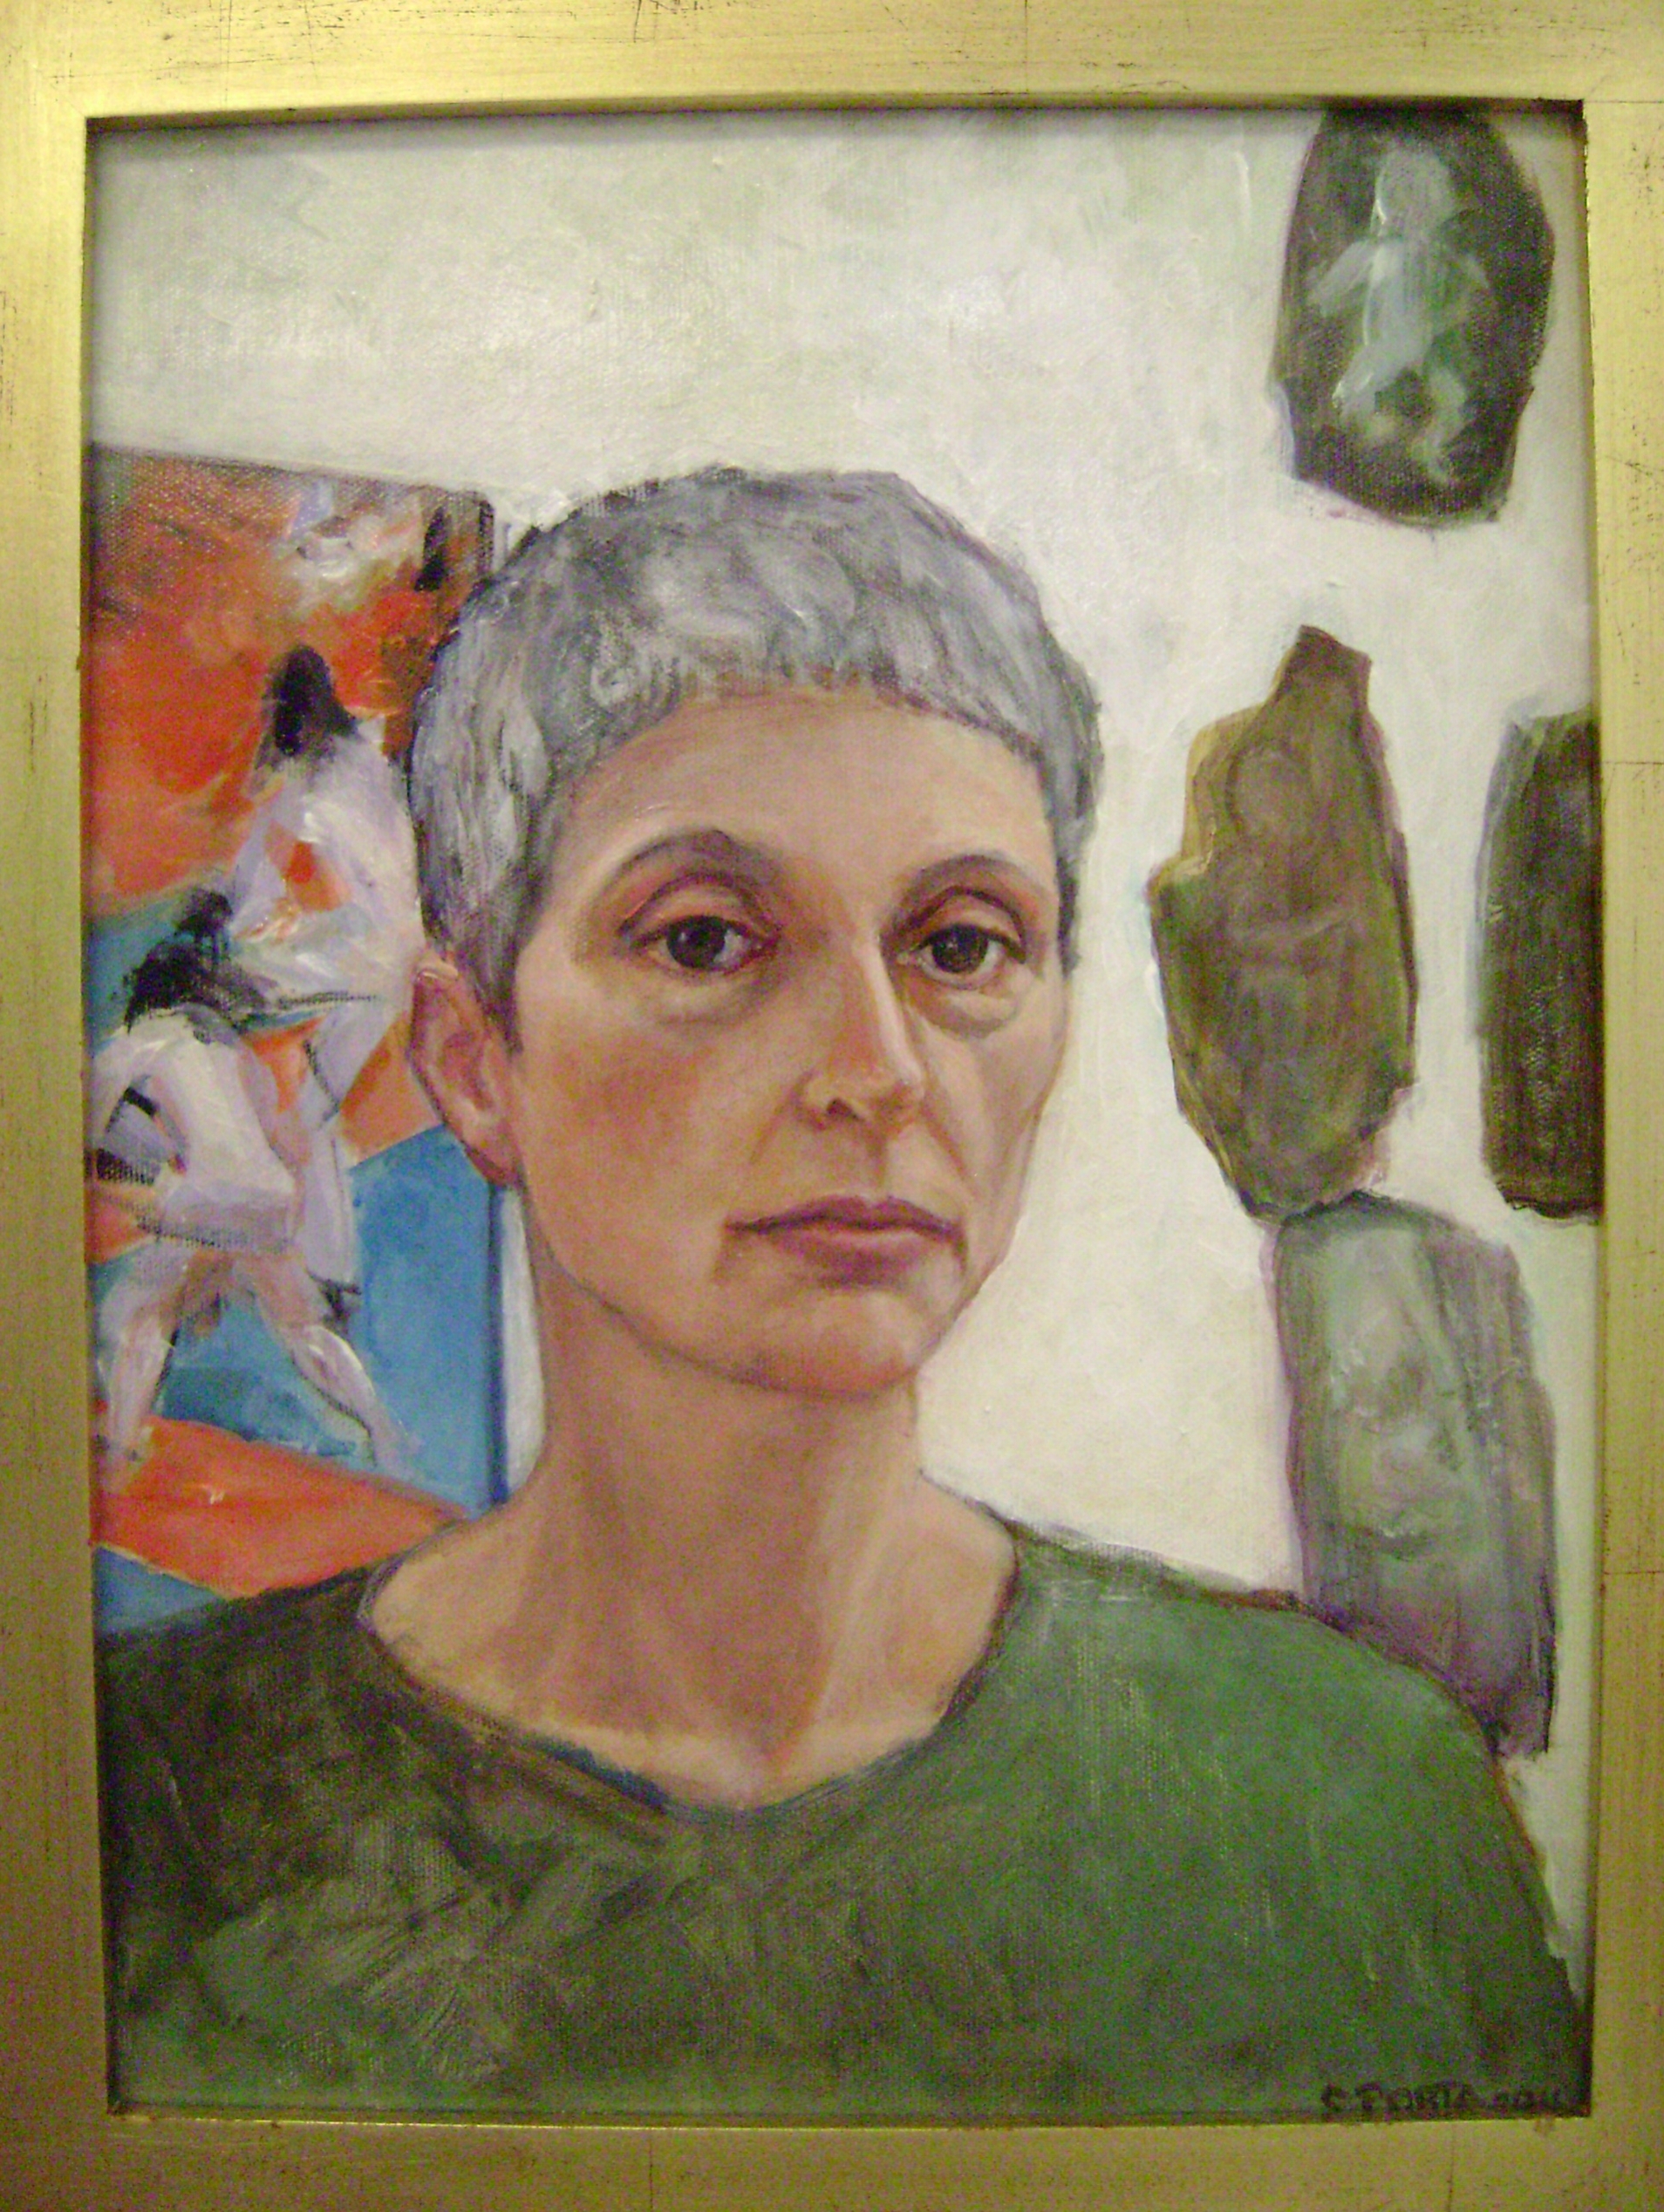 Self Portrait, "After the Chemo"